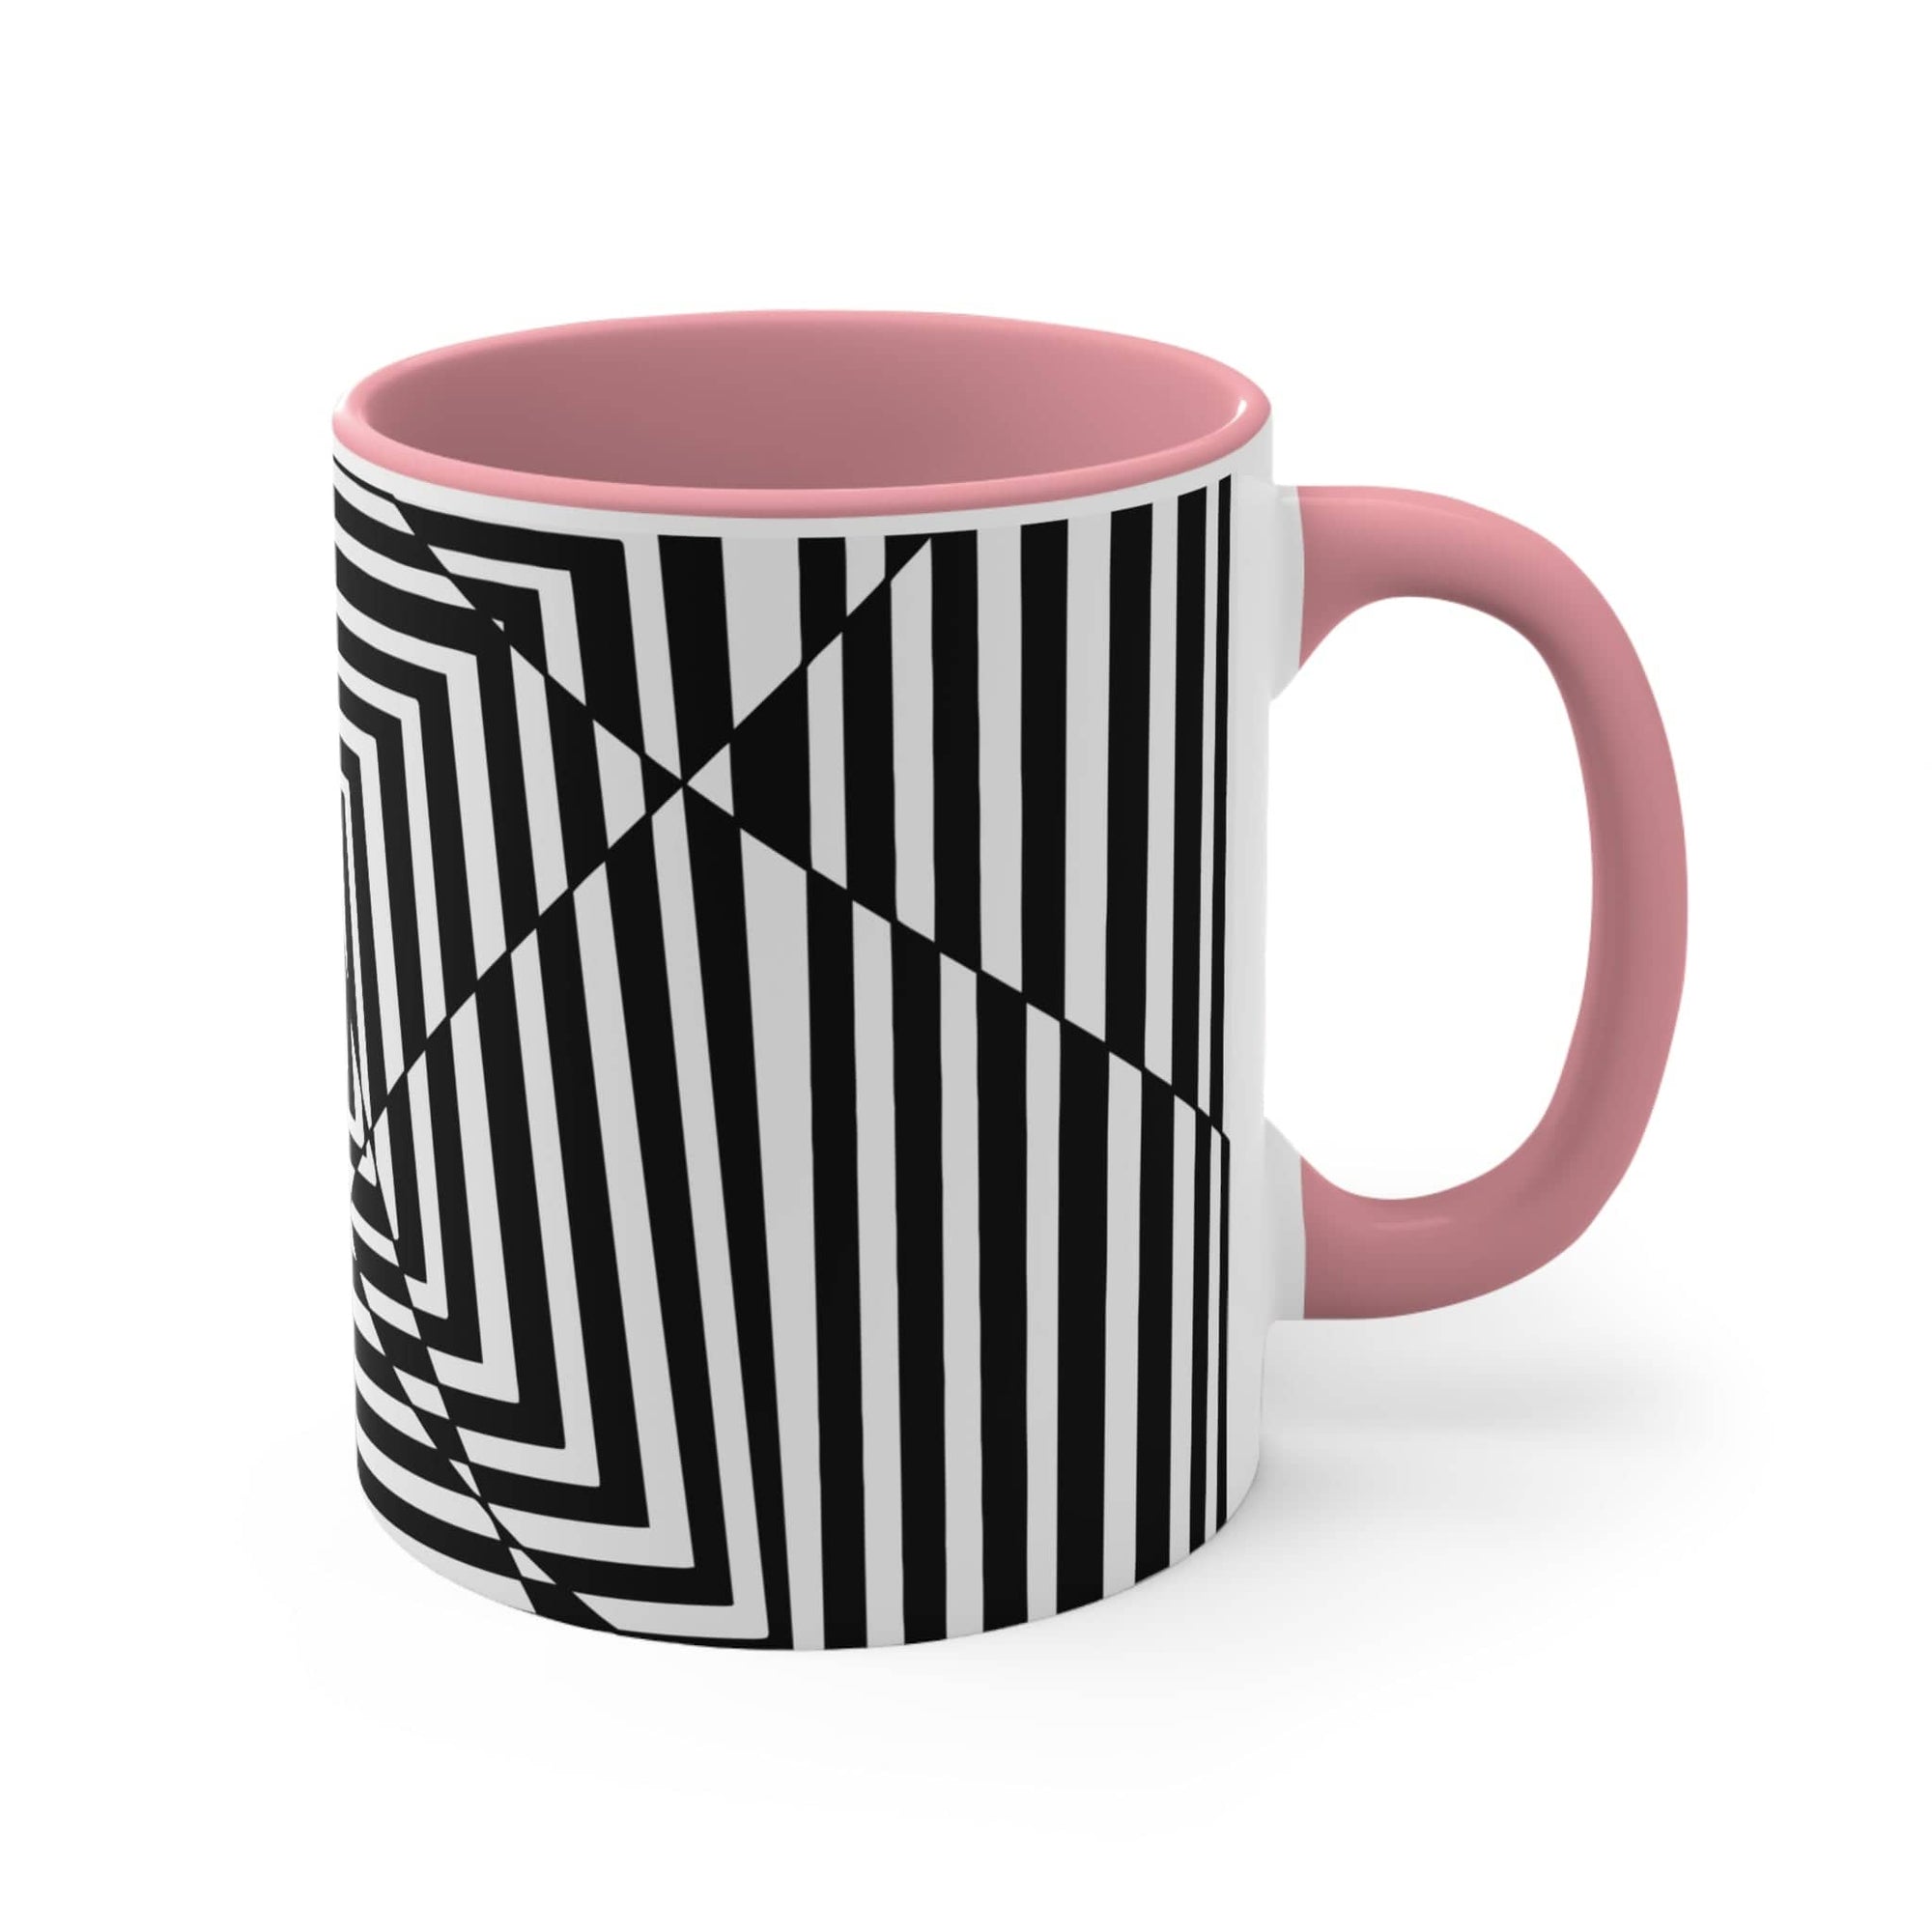 Black & White Abstract Accent Mugs, 11oz Goody Goody Gum Drops online lolly shop